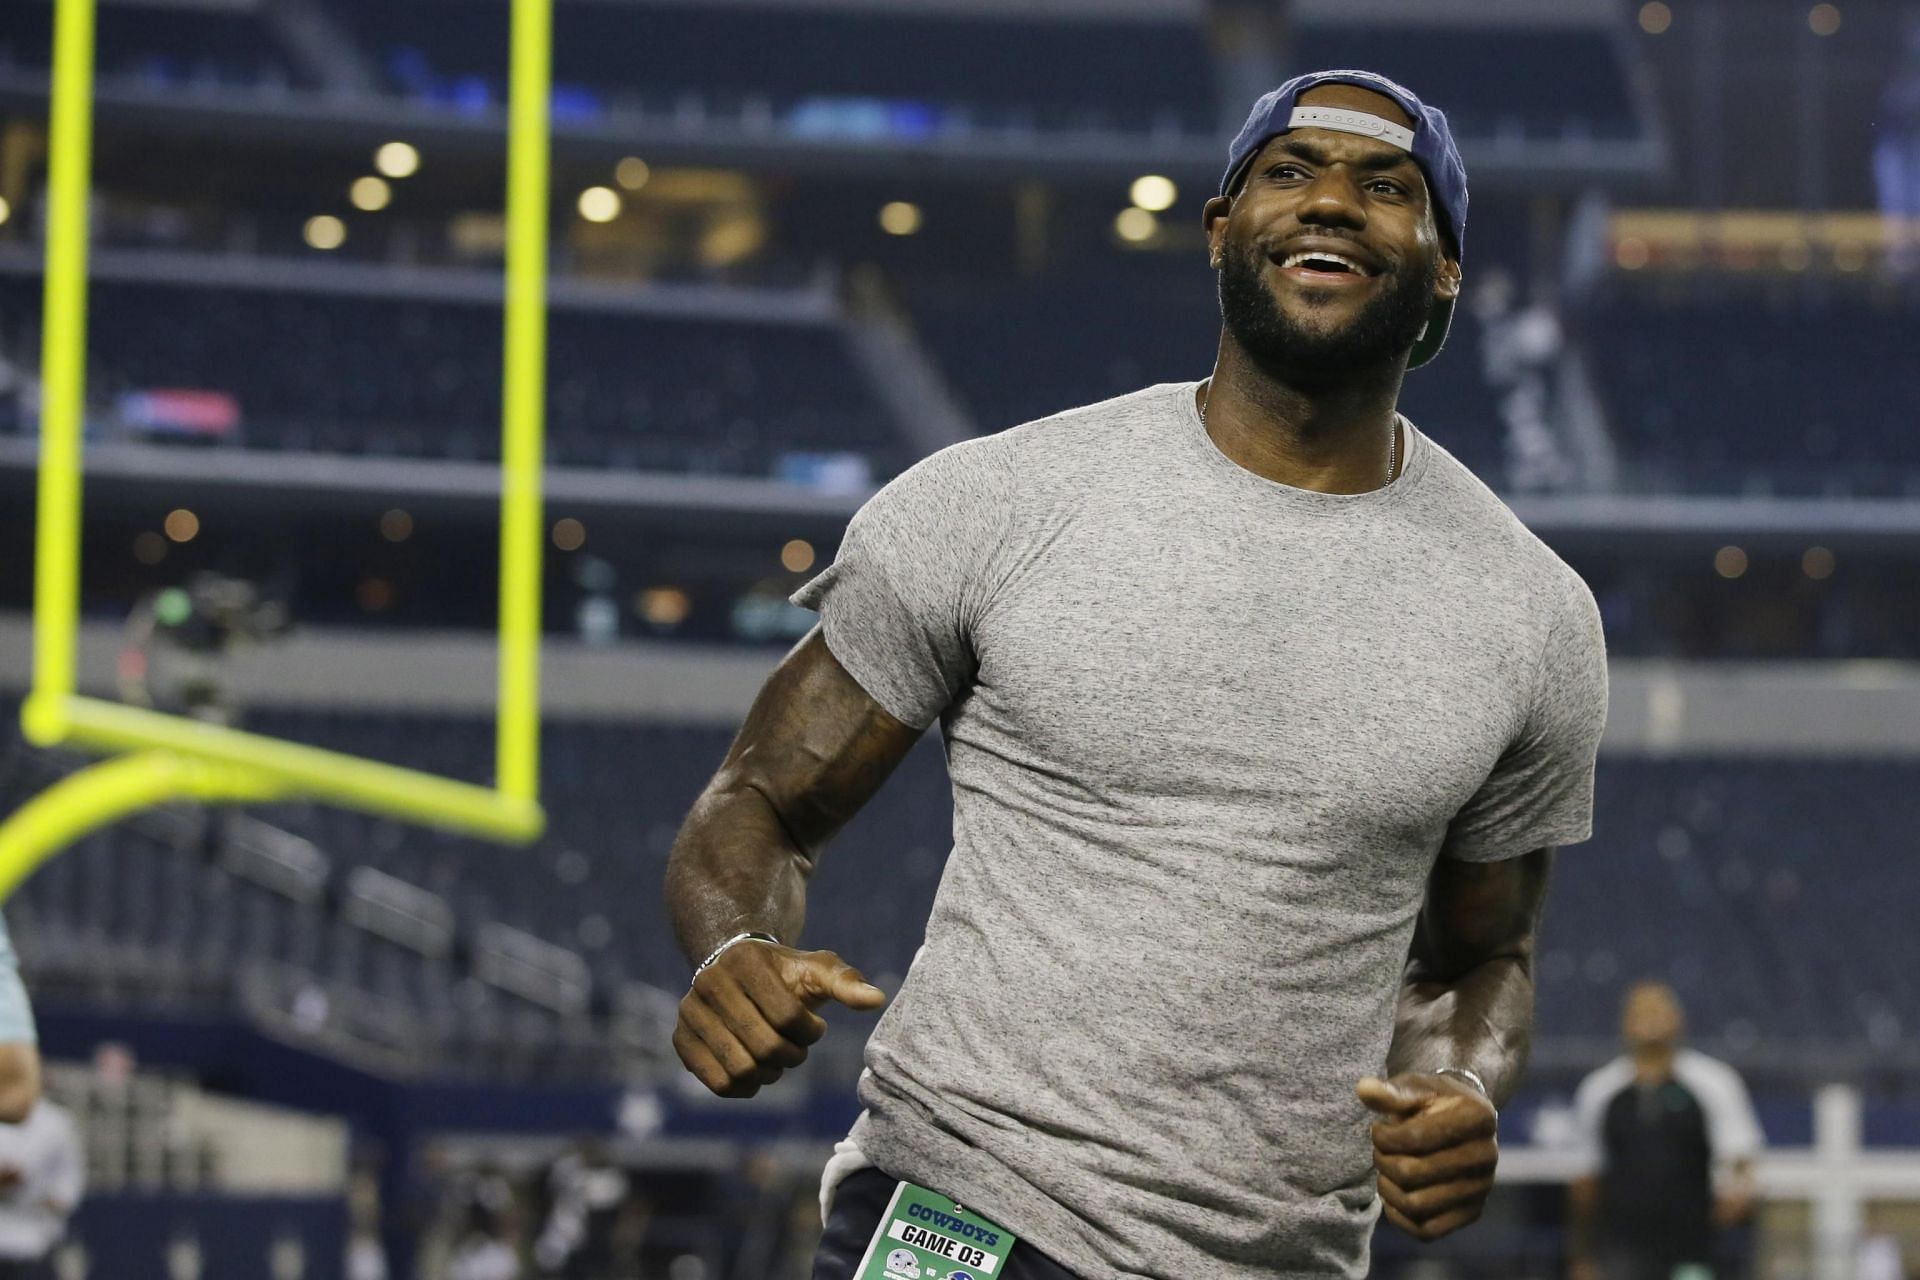 LeBron James mentioned that he got an offer from Jerry Jones, the Dallas Cowboys owner, to play wide receiver for America&#039;s team [Photo: Bleacher Report]